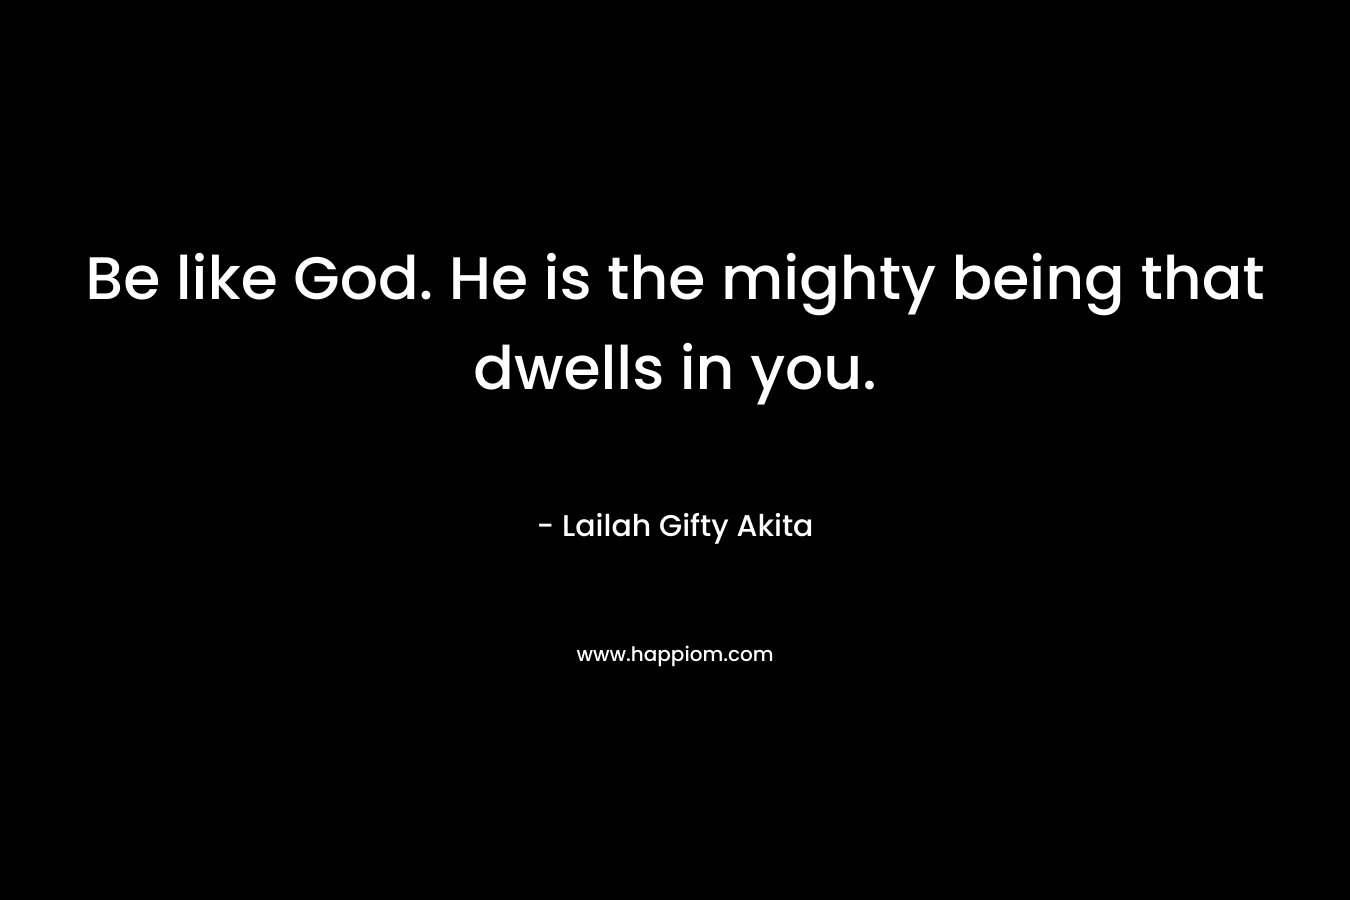 Be like God. He is the mighty being that dwells in you.